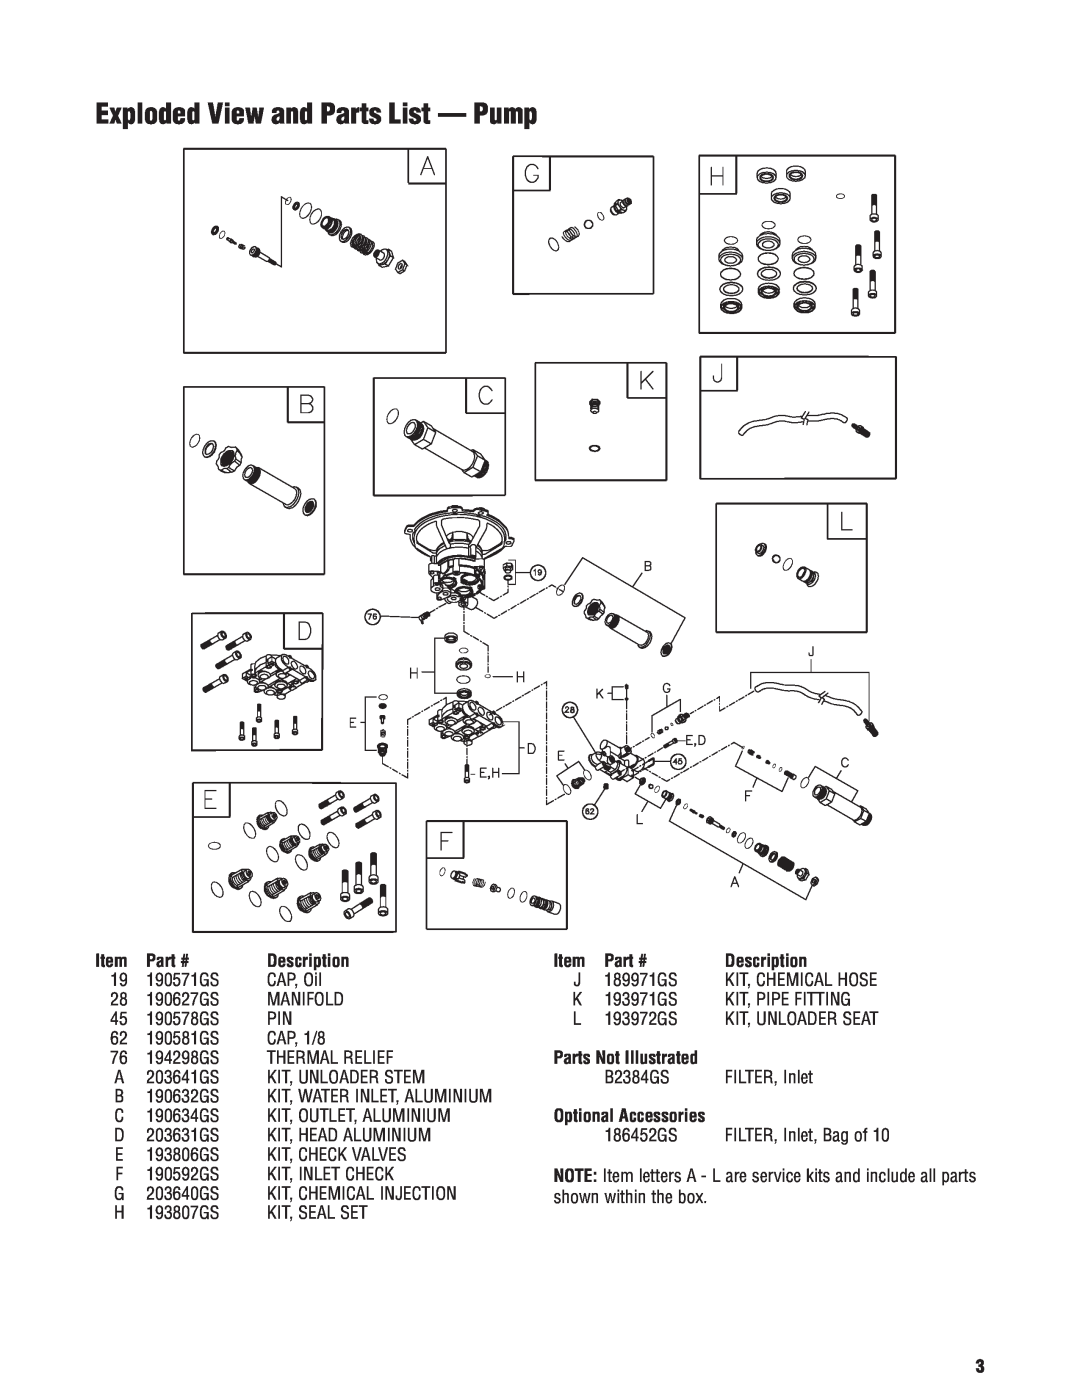 Briggs & Stratton 20319 manual Exploded View and Parts List - Pump, Parts Not Illustrated, Description 